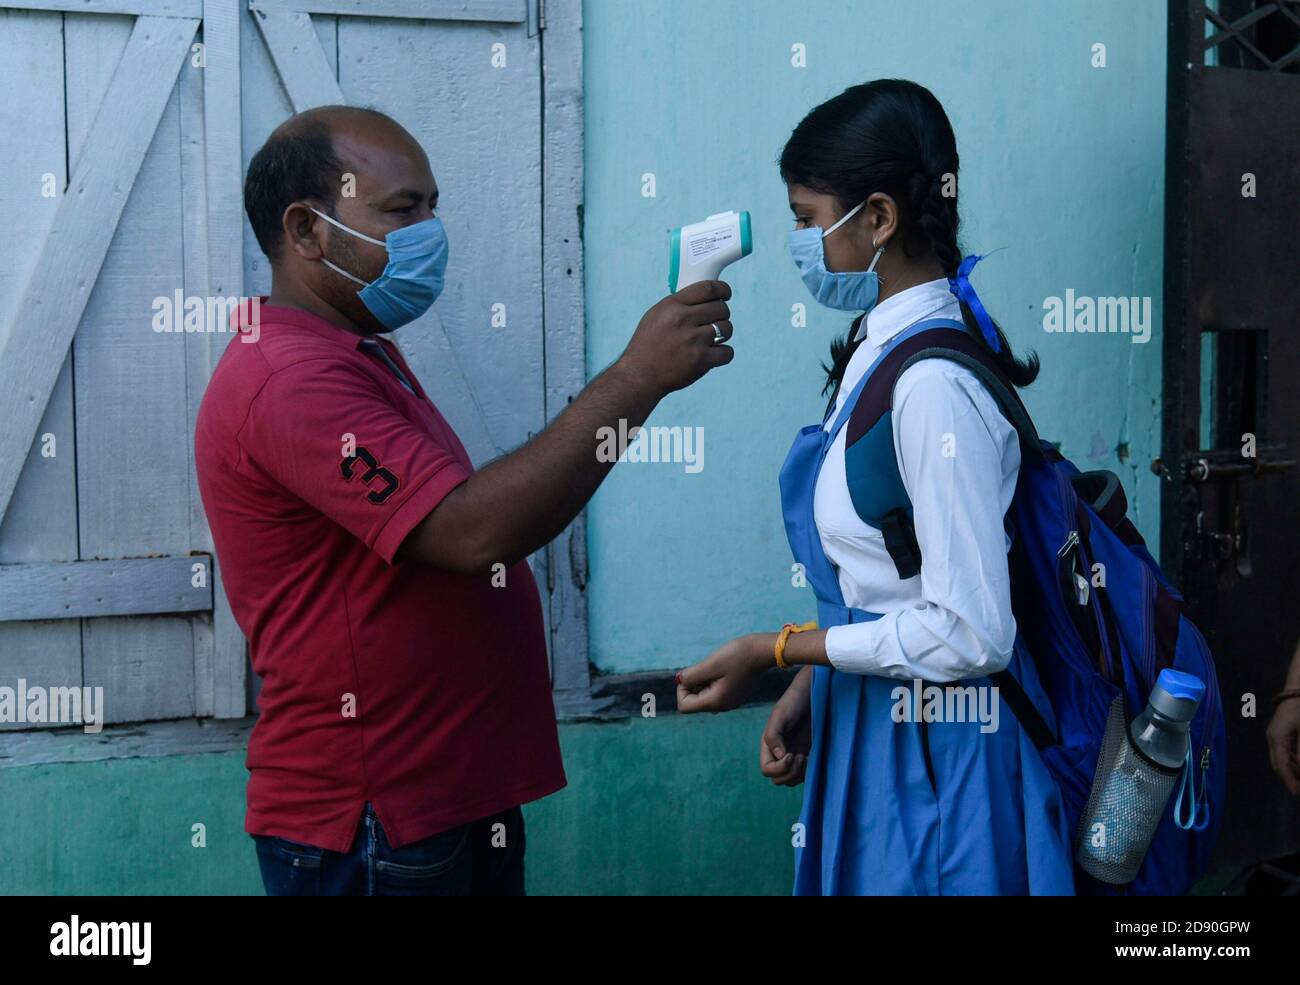 Guwahati, Assam, India. 2nd November, 2020. Employee thermal screening a student before attend a class, after schools re-opened following a gap of more than seven months due to coronavirus pandemic, in Guwahati, Assam, India on Nov. 2, 2020. Credit: David Talukdar/Alamy Live News Stock Photo